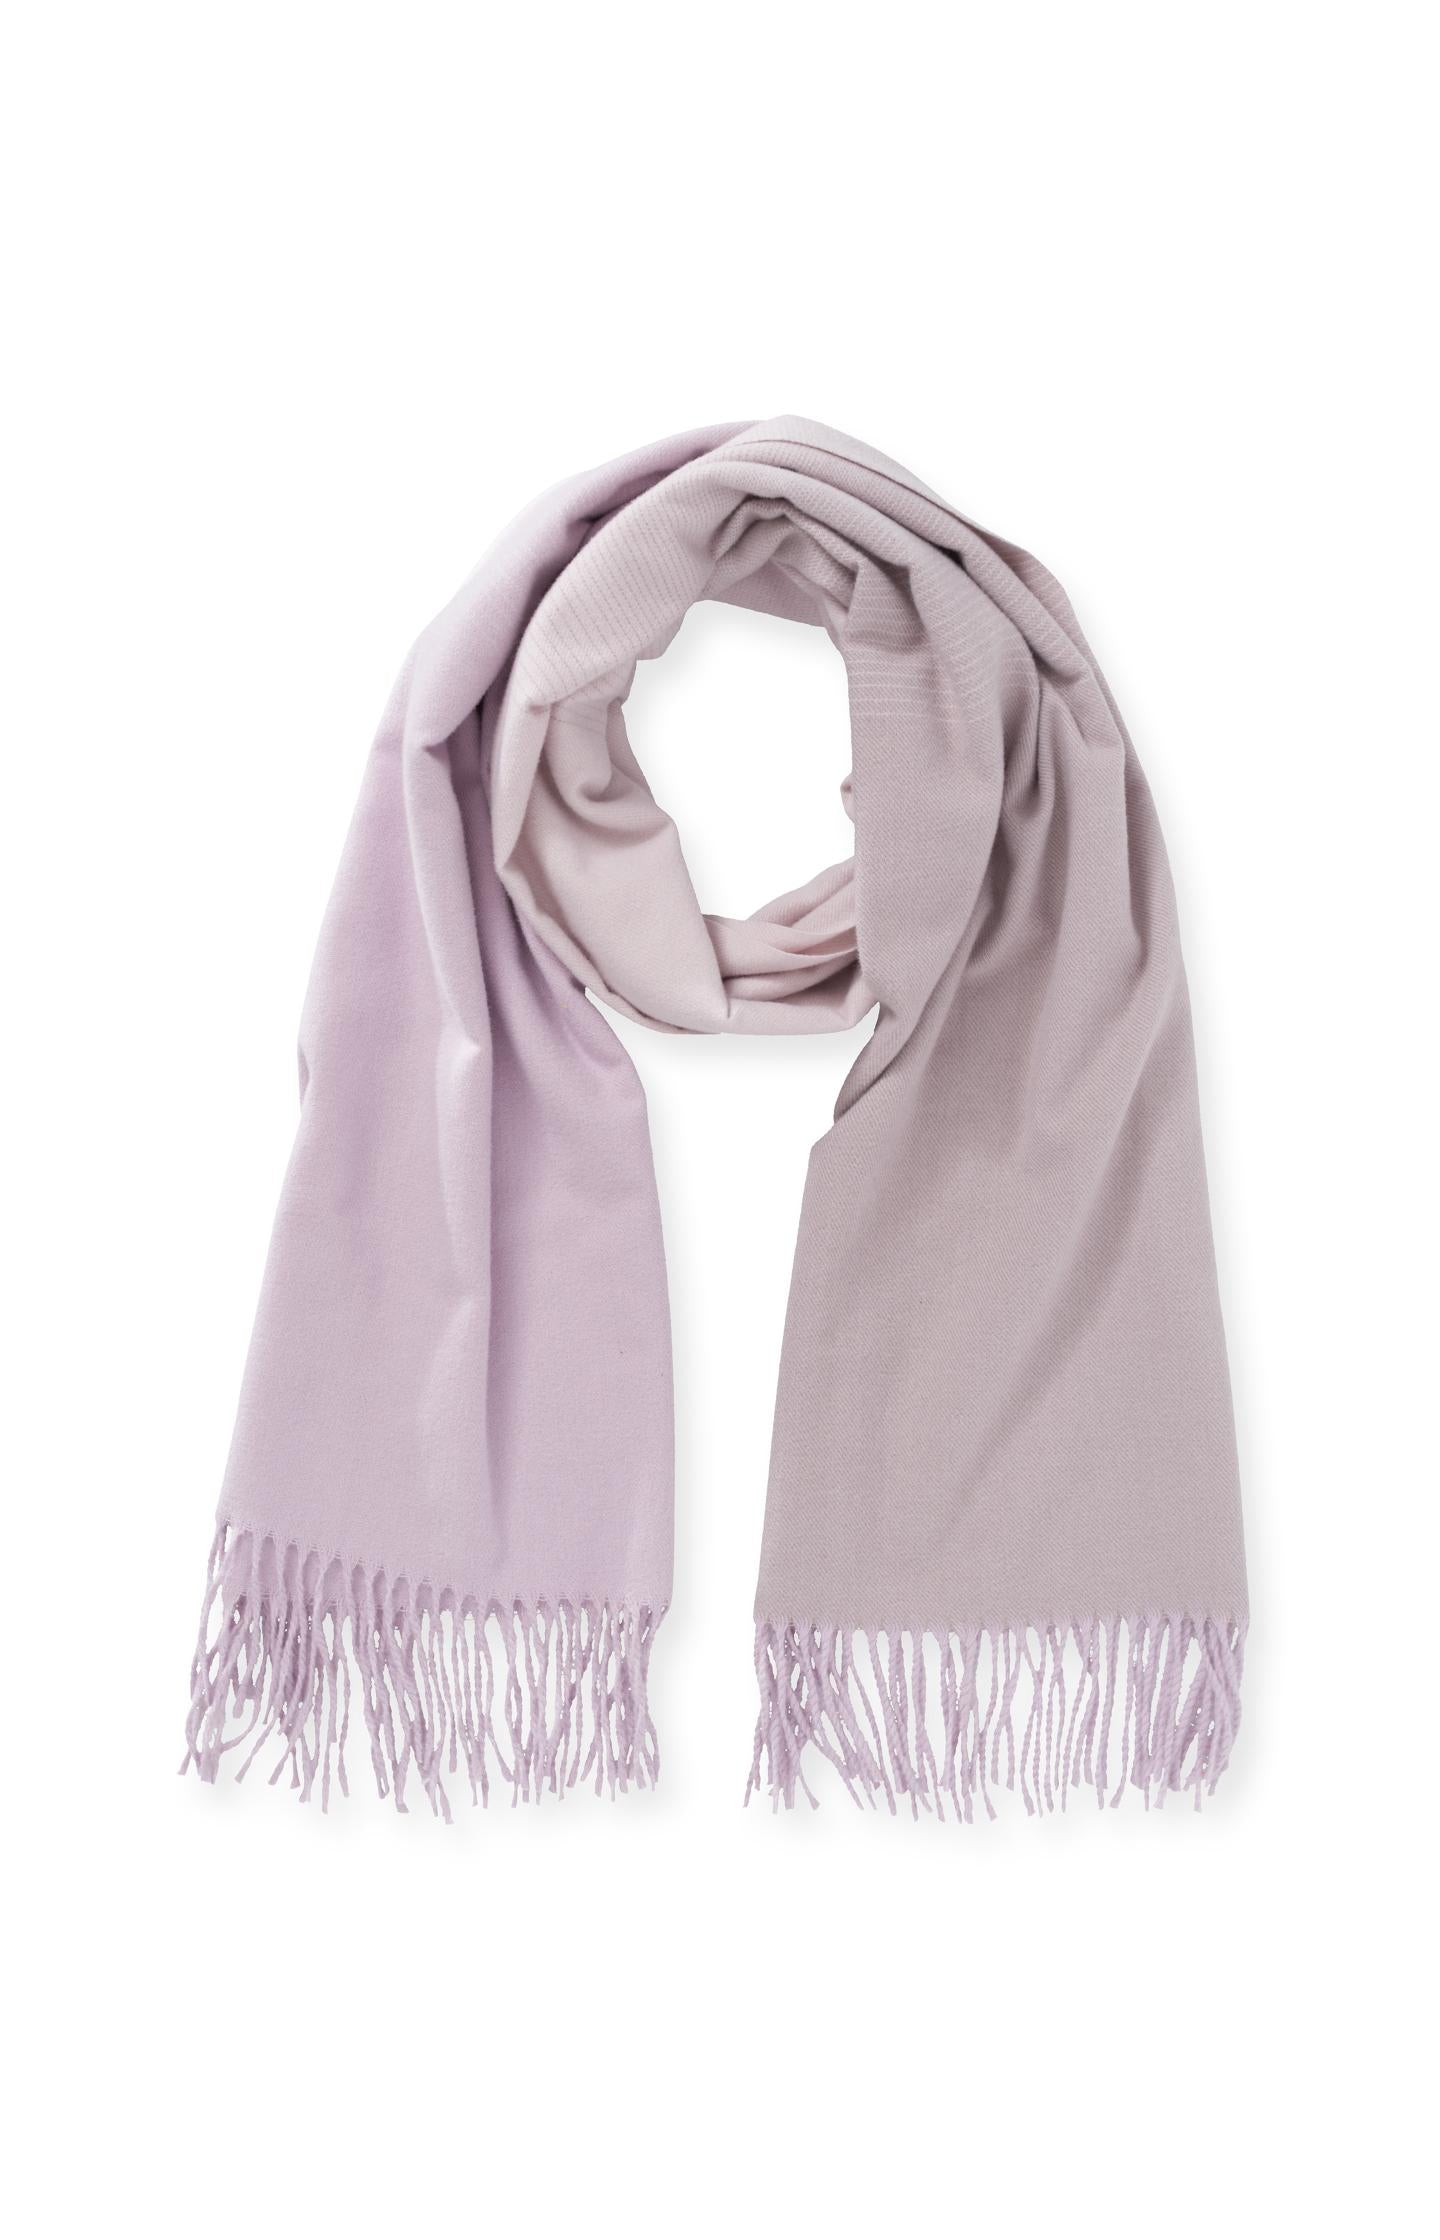 Soft knitted scarf with gradient effect and fringes - Orchid Petal Purple Dessin - Type: product